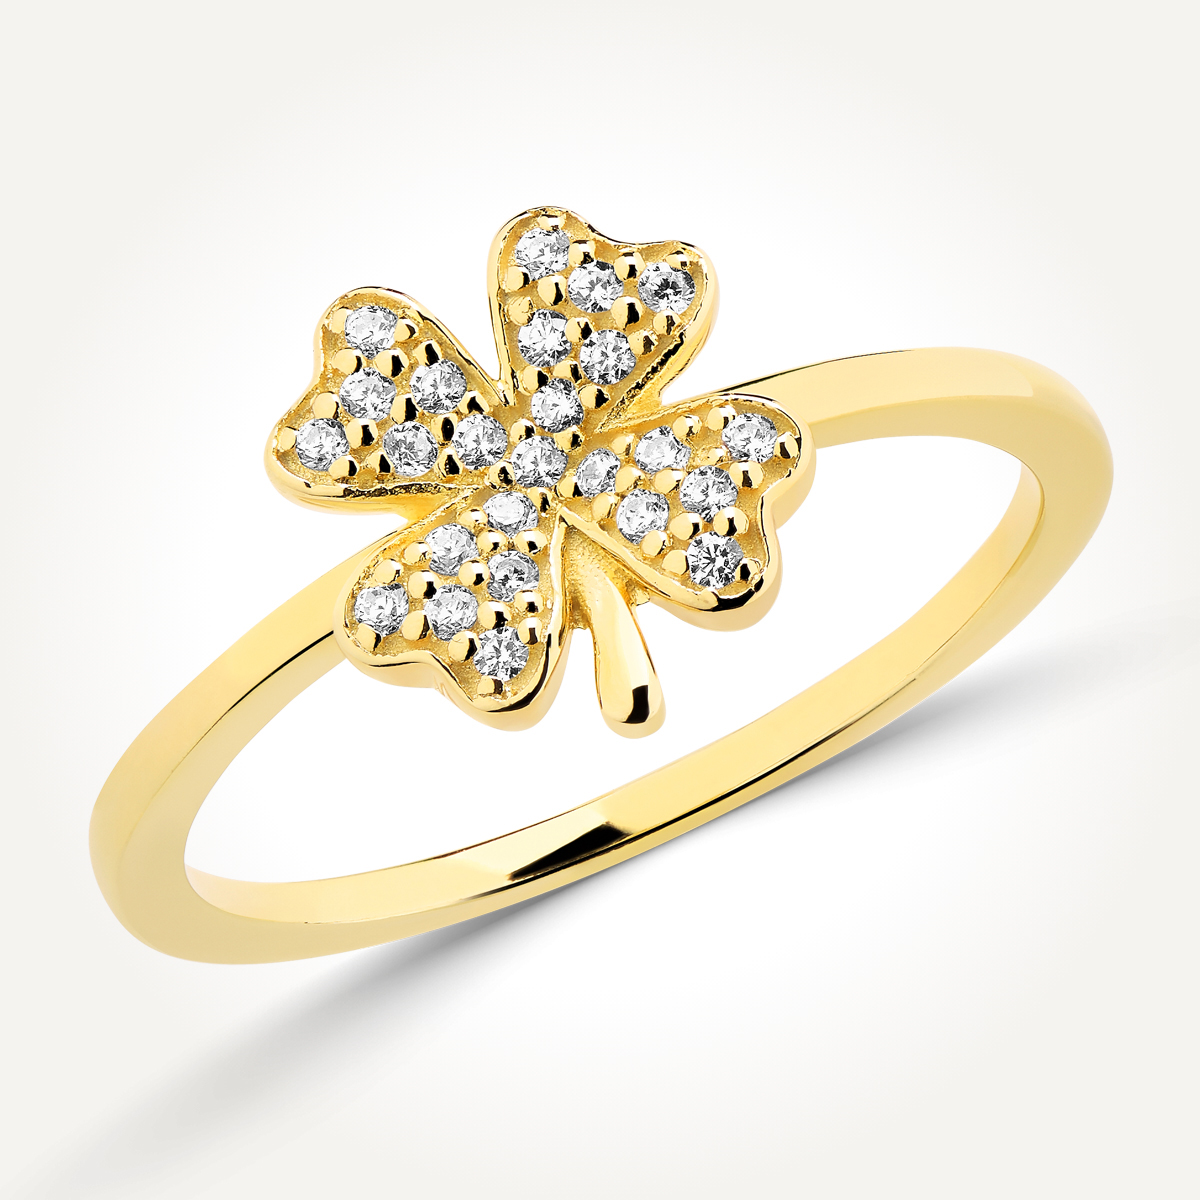 14KT Yellow Gold Four Leaf Clover Ring